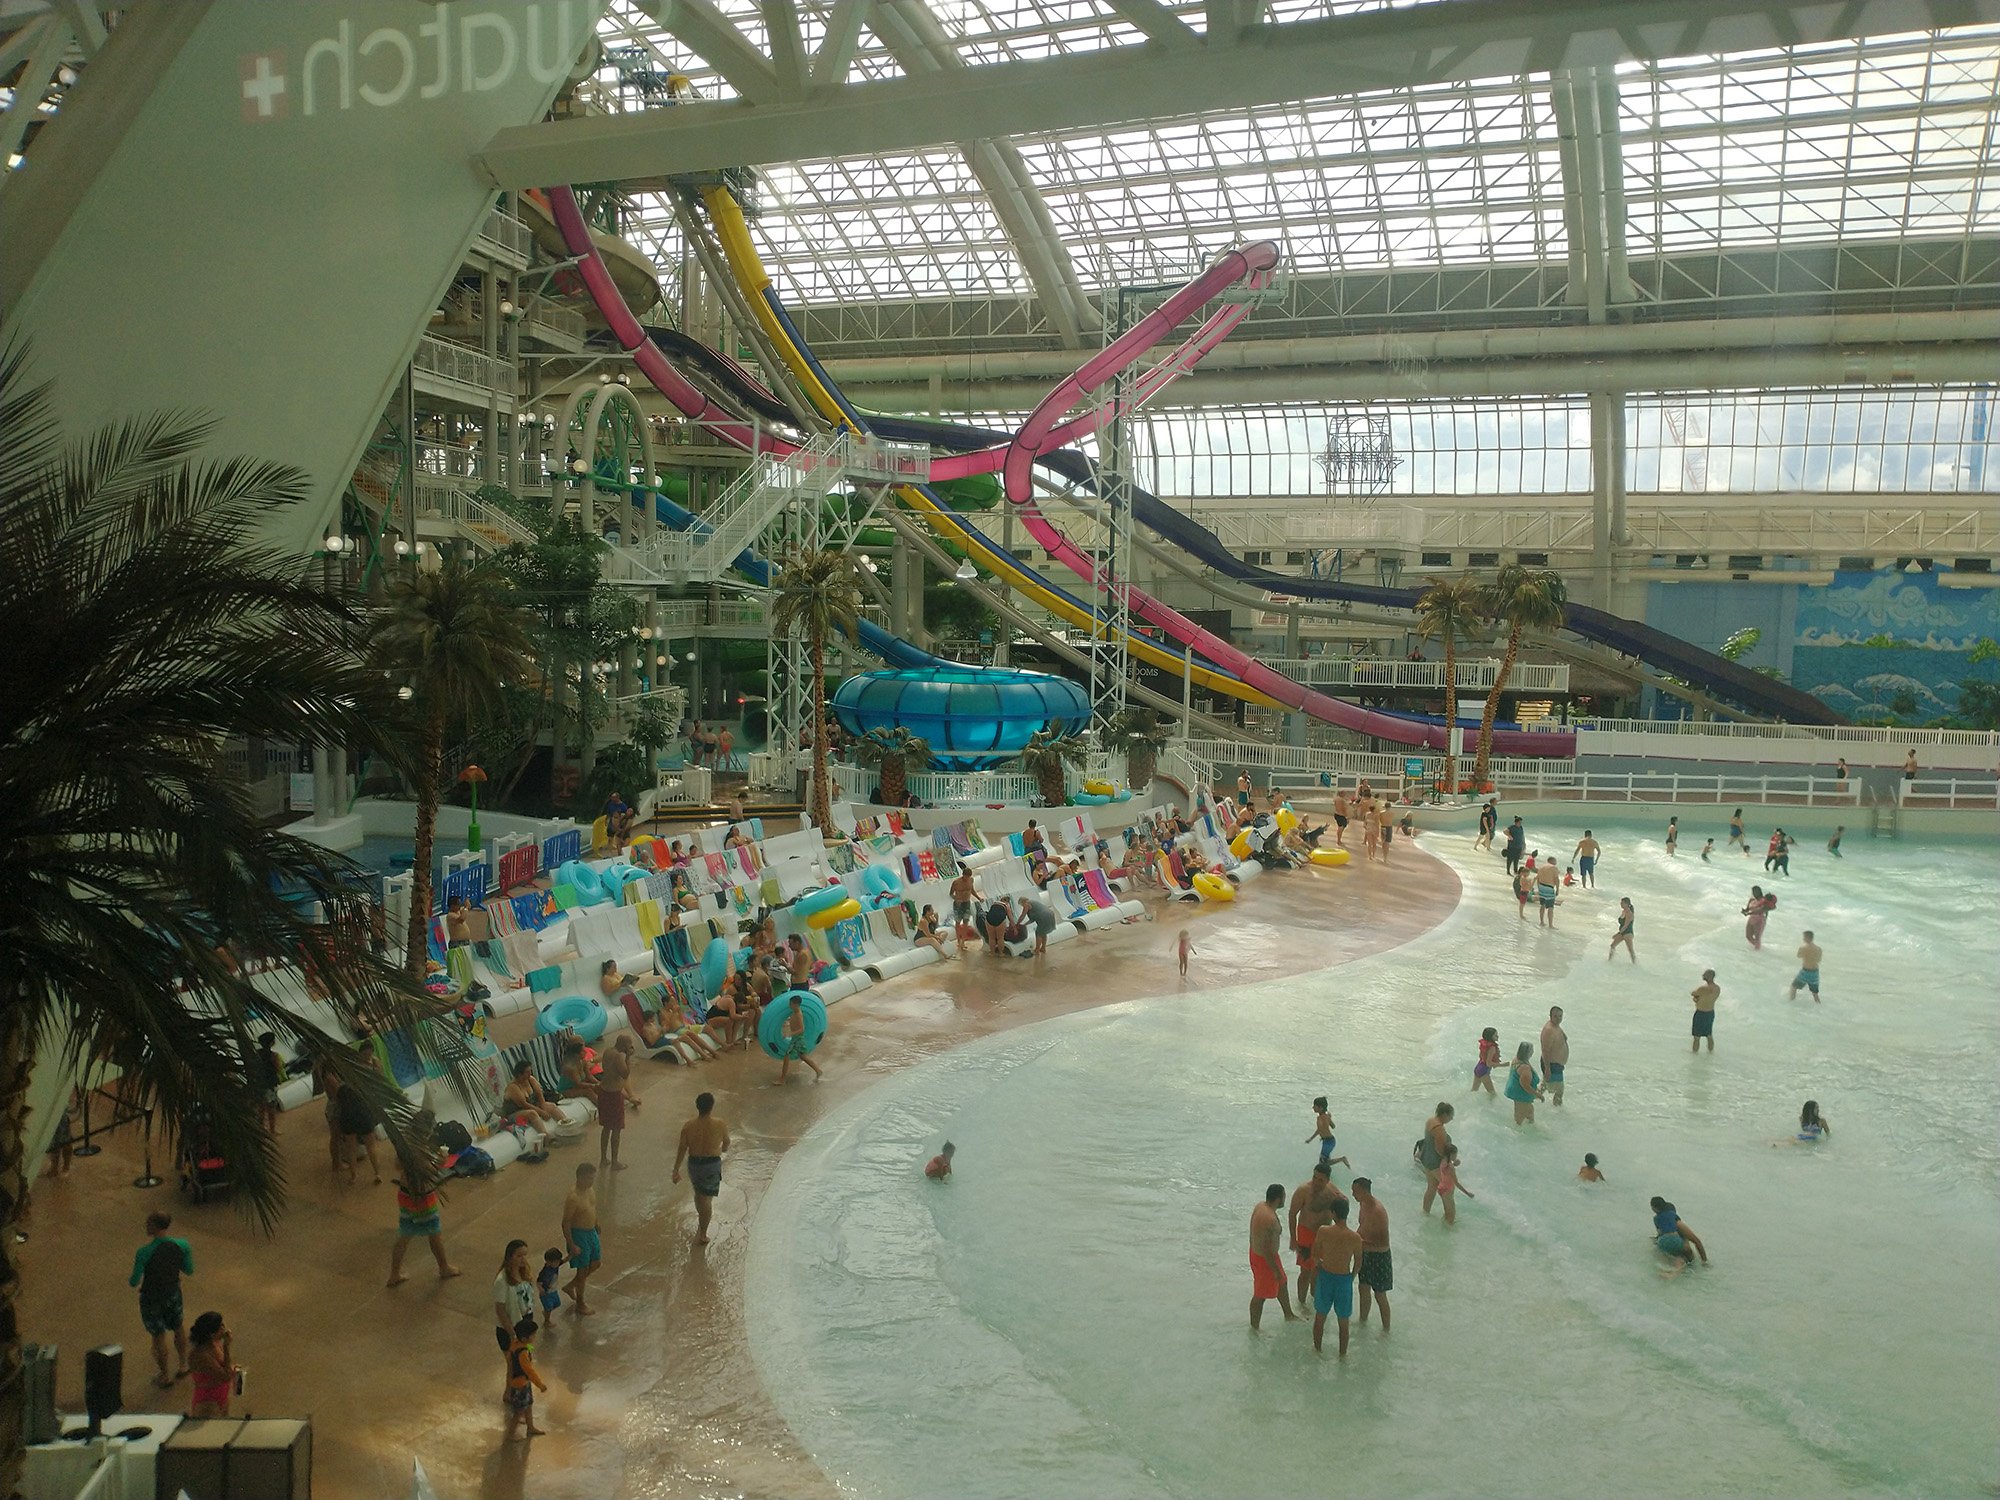 Probably the big attraction: The huge indoor waterpark. Must be PACKED in the winter.